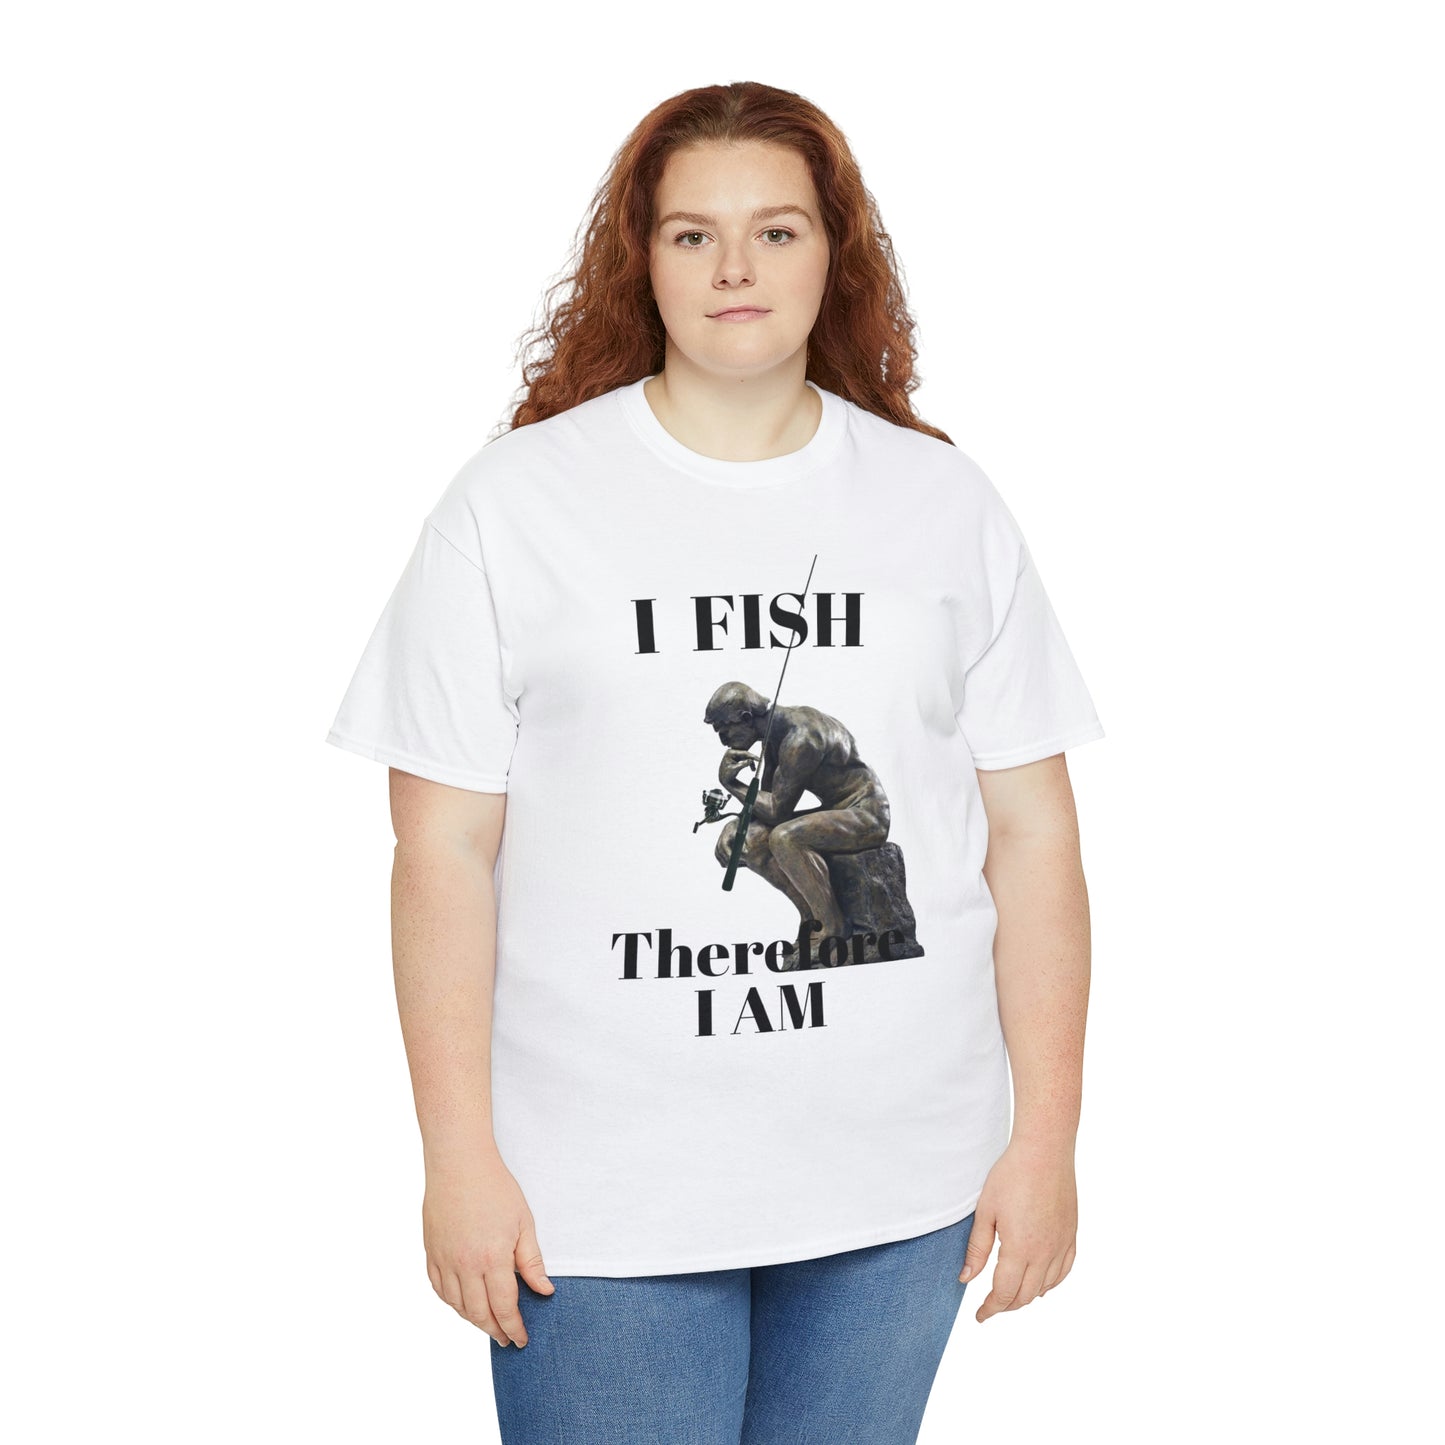 I Fish Therefore I am Unisex Heavy Cotton Tee